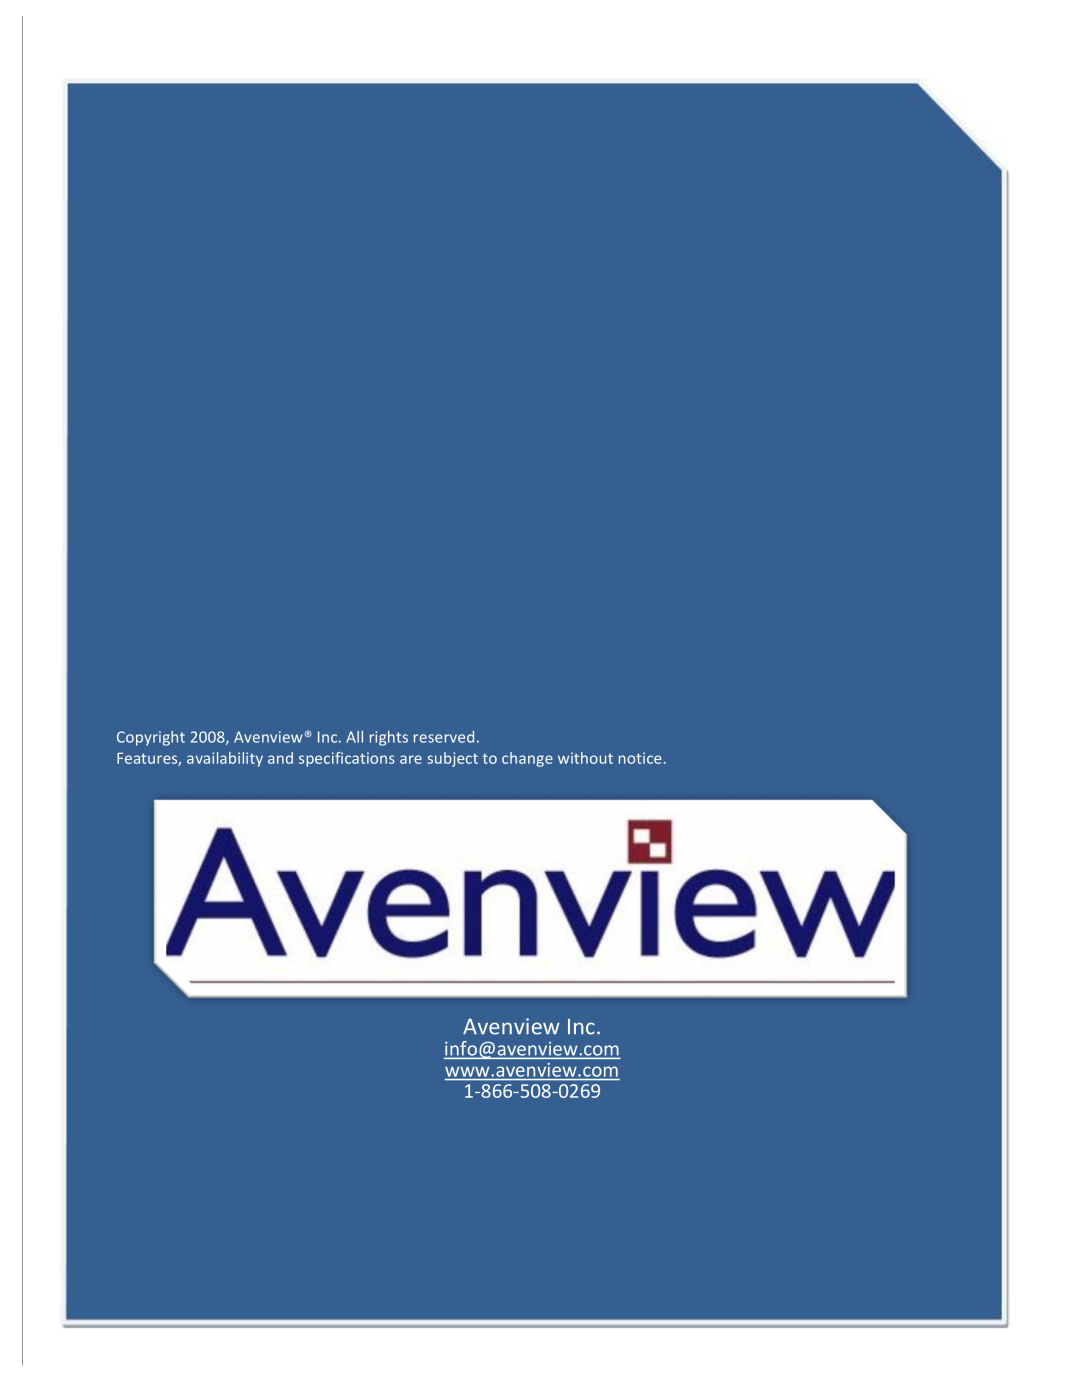 Avenview C-COMP-HDSDI manual info@avenview.com, Copyright 2008, Avenview Inc. All rights reserved 